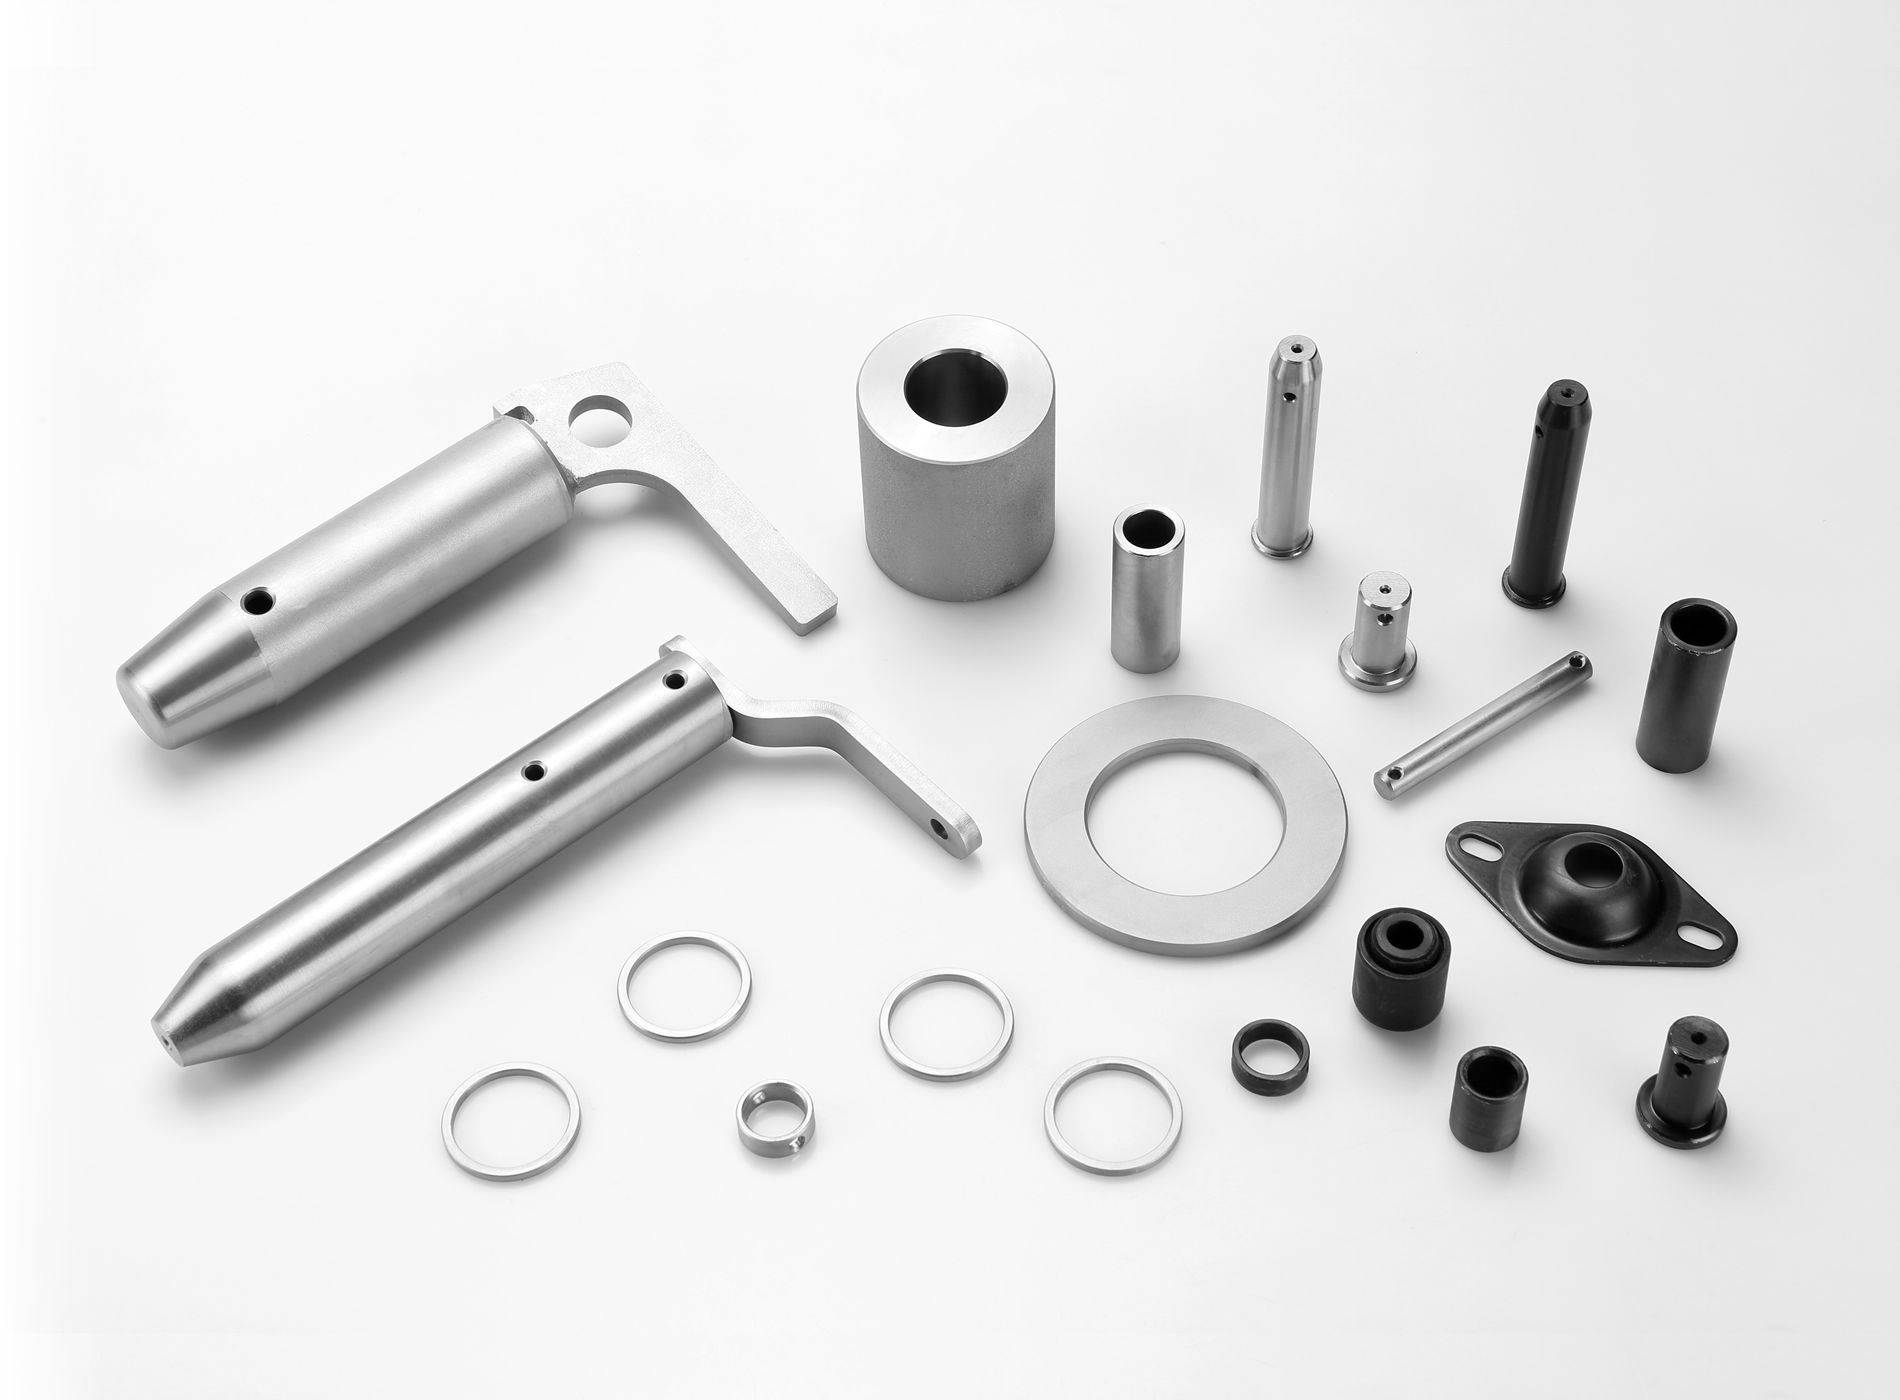 Metal parts with an anti-corrosion zinc nickel coating treatment